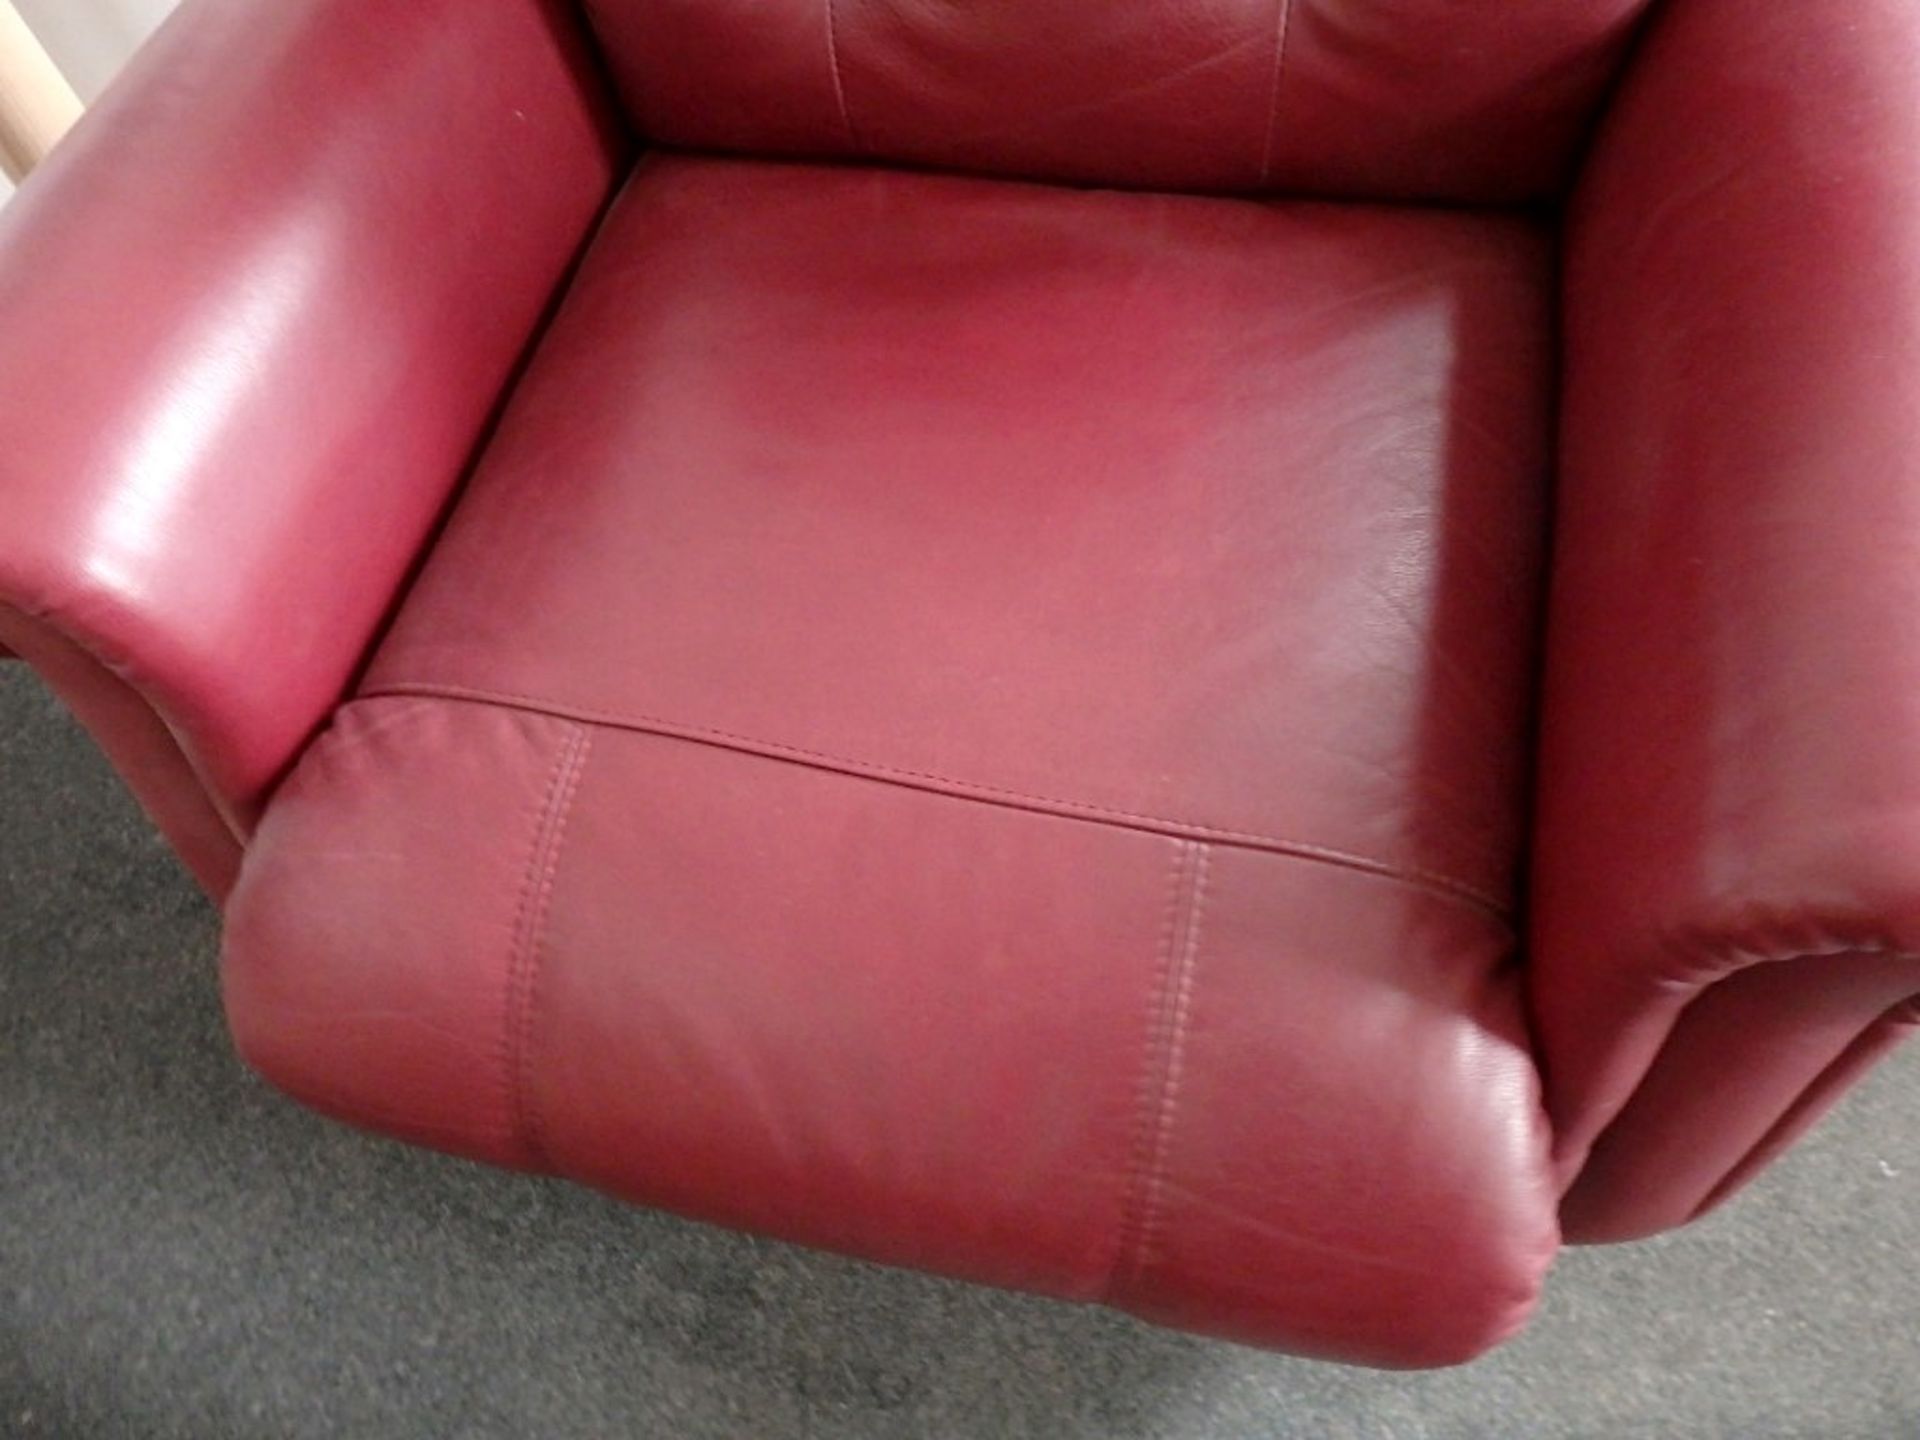 1 x "Beatrice" Riser Recliner Chair By TCS - Upholstered In Genuine Italian Leather (Red) - Pocket - Image 3 of 9